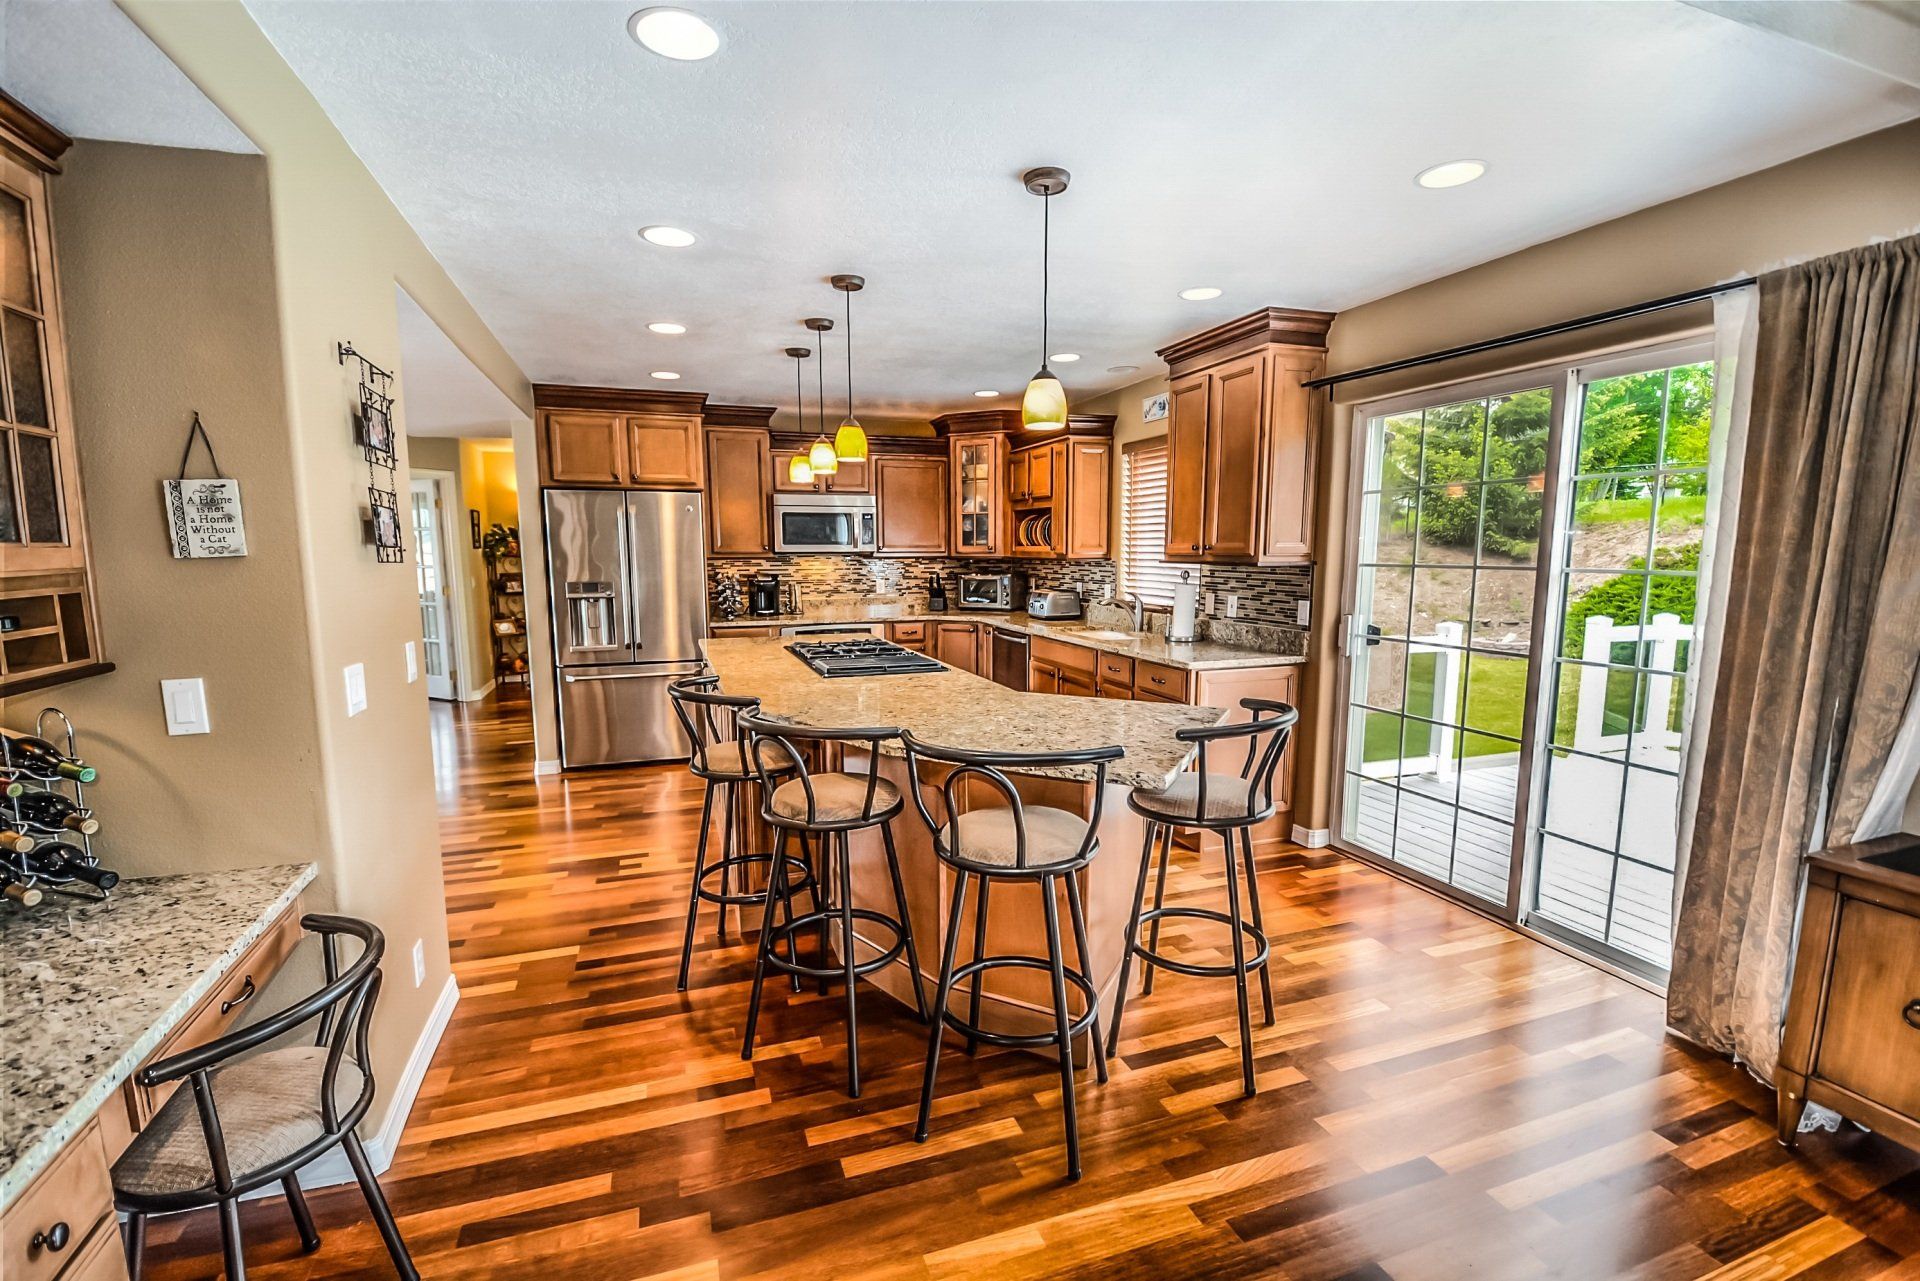 a kitchen with hardwood floors , stainless steel appliances and a large island .